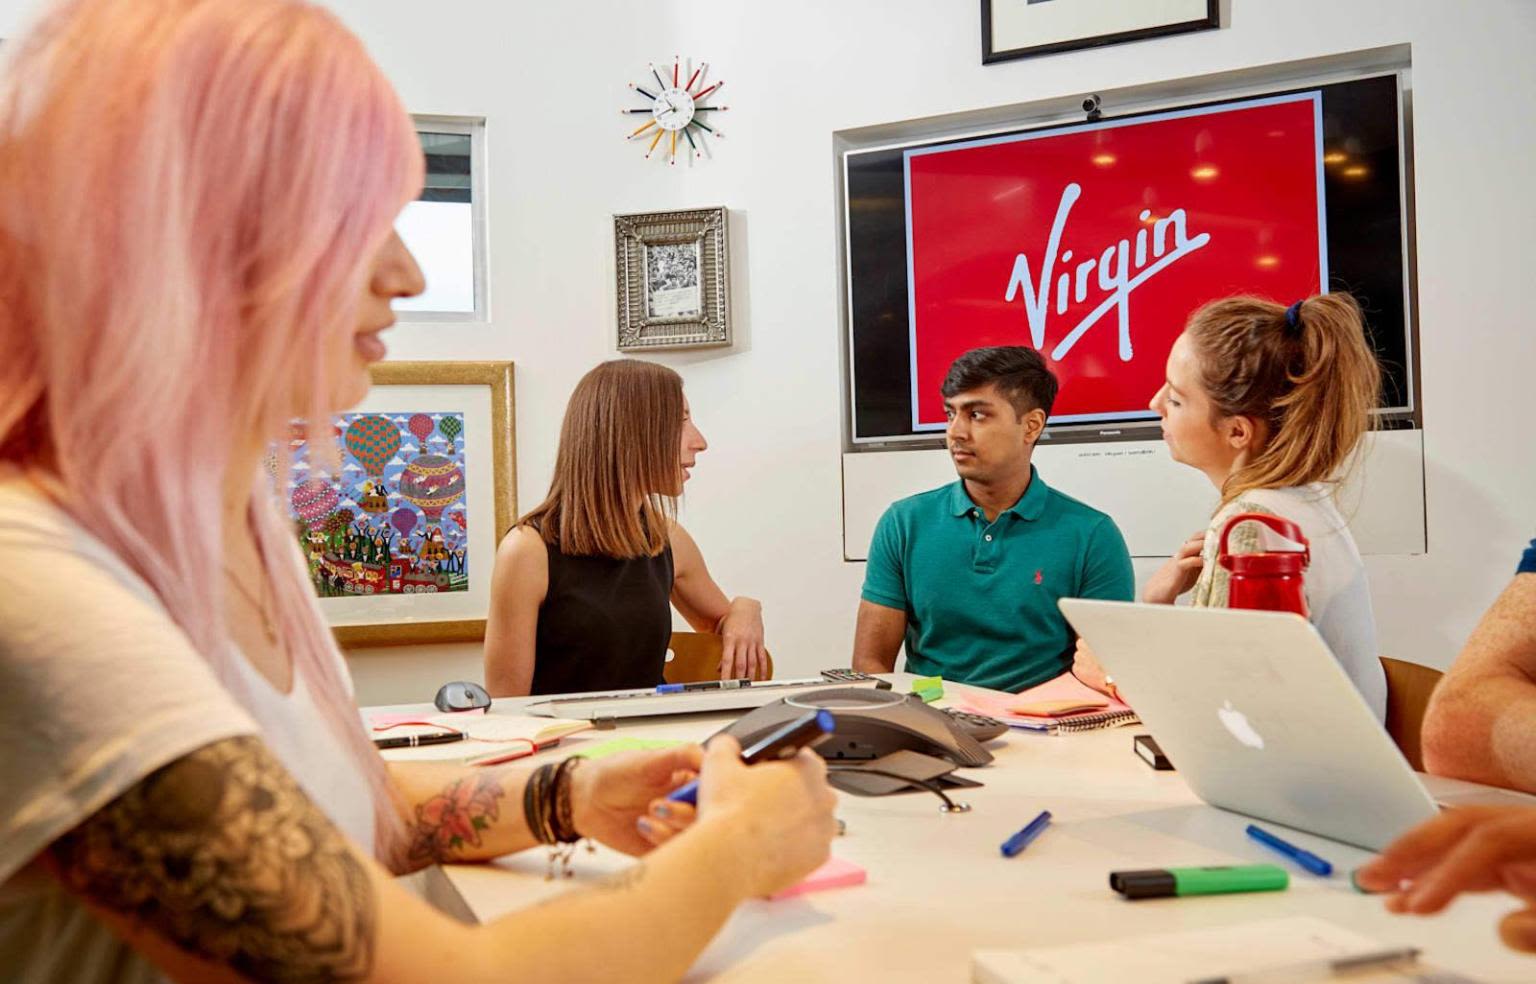 People sitting around a table talking, a screen in the background has the Virgin logo on it